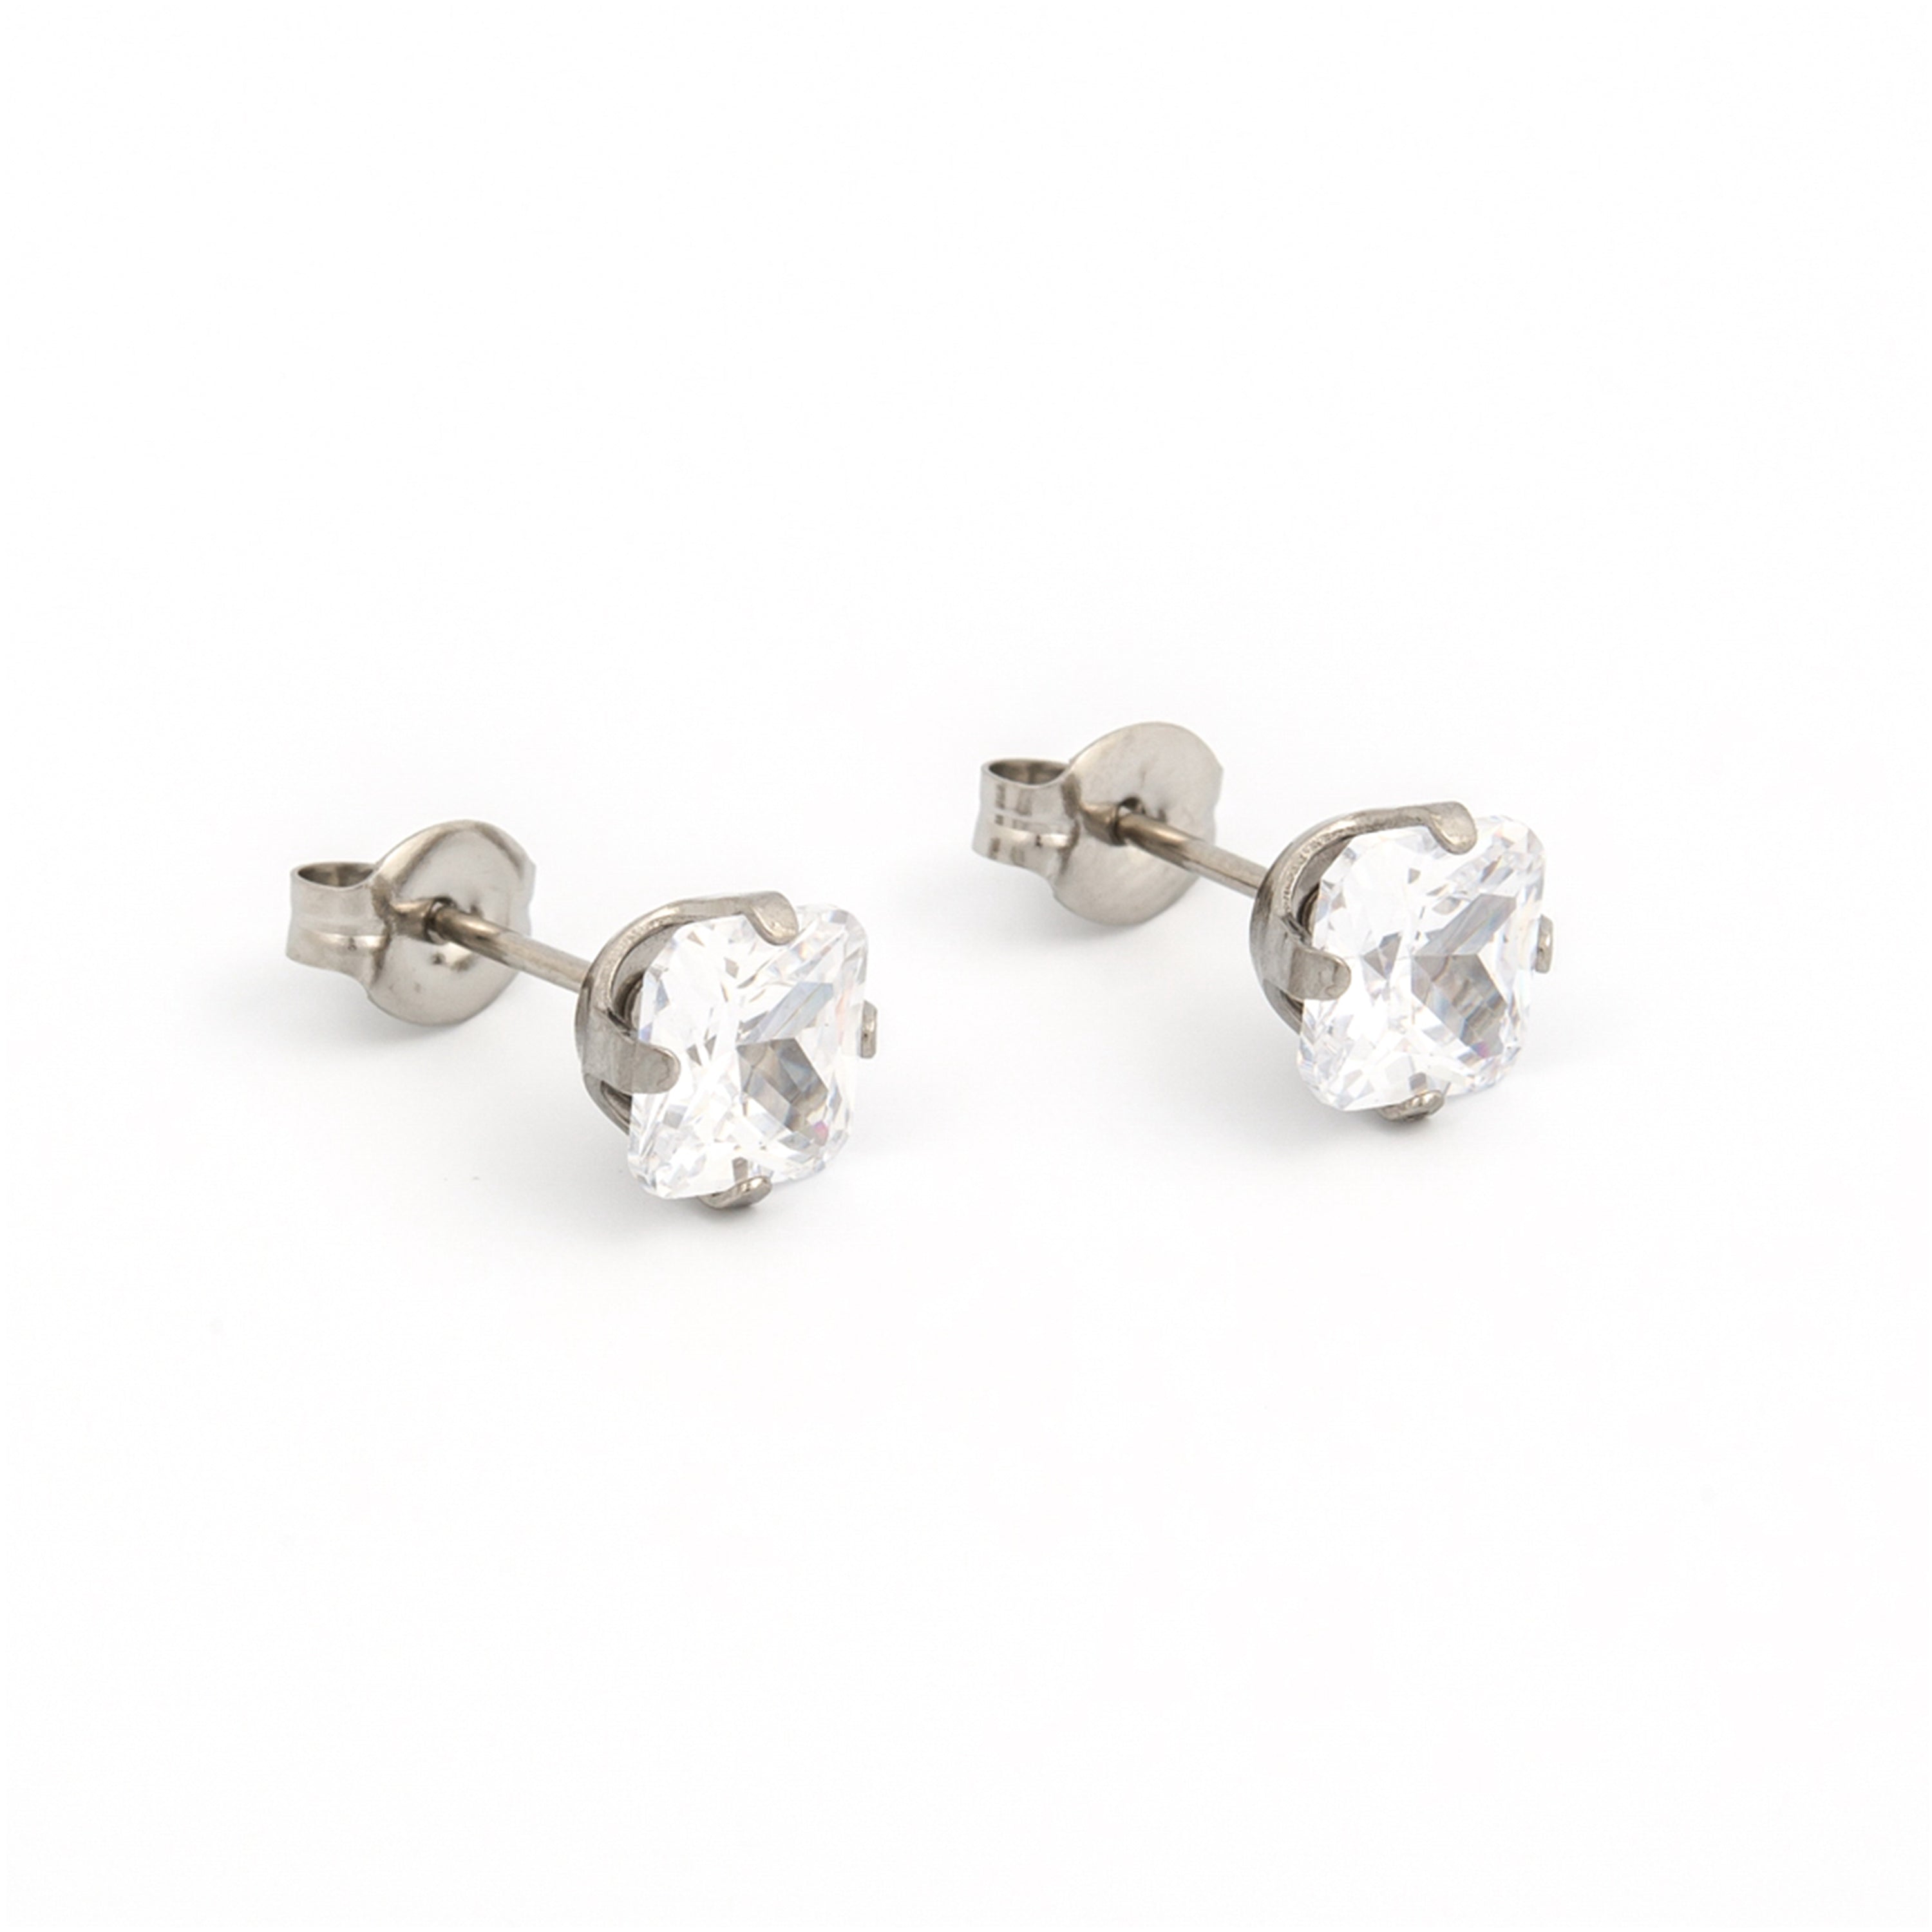 6*6MM Cubic Zirconia Princess cut Allergy Free Stainless Steel Ear Studs | Ideal for everyday wear